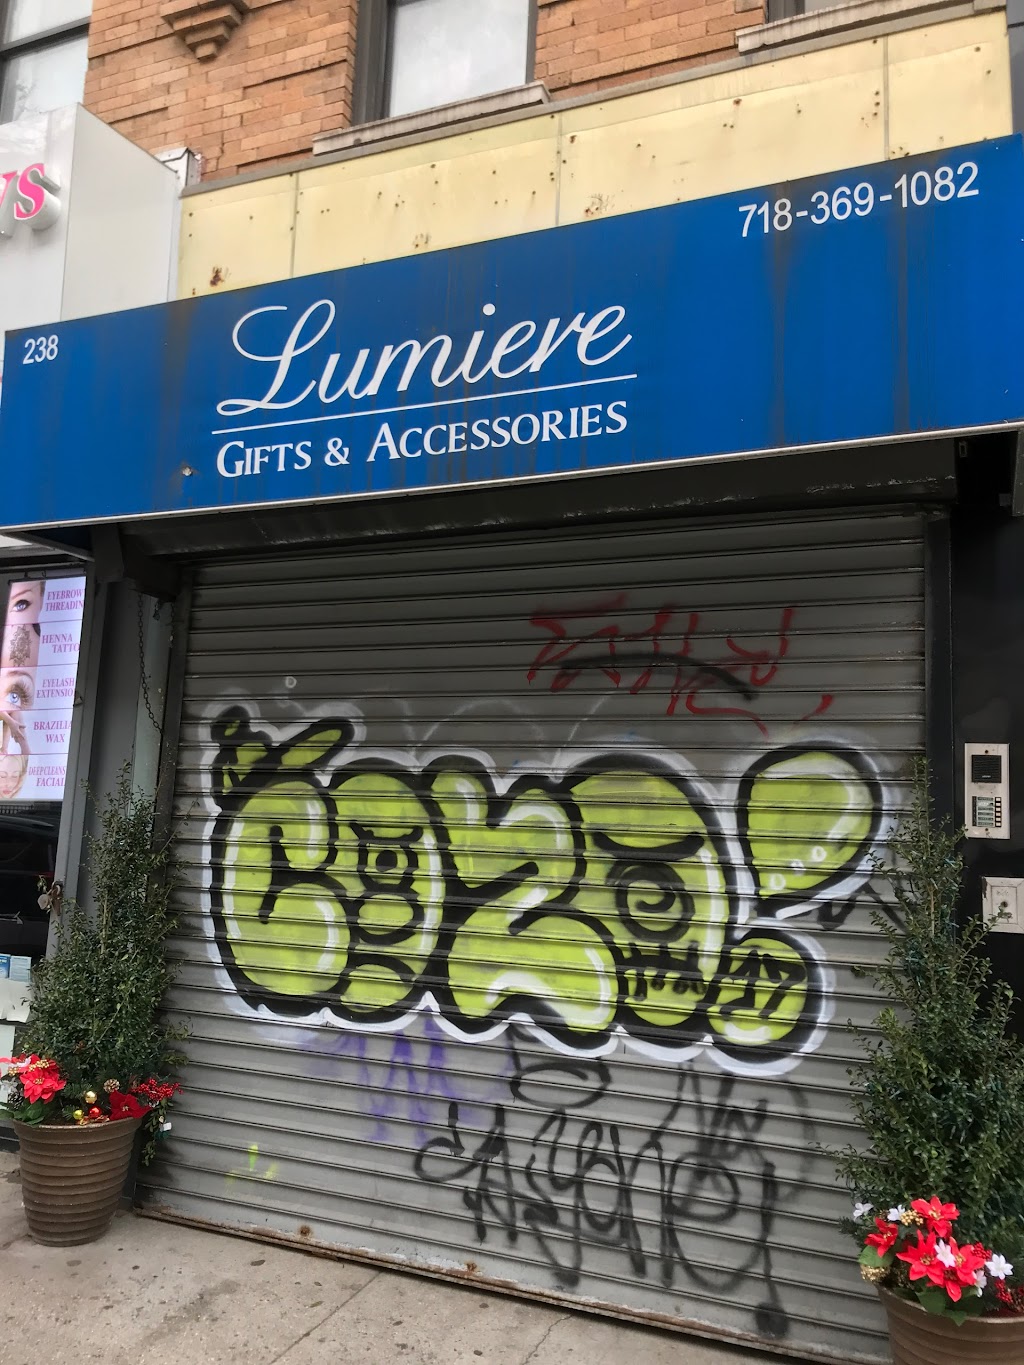 Lumiere Gifts & Accessories | 238 7th Ave, Brooklyn, NY 11215 | Phone: (718) 369-1082